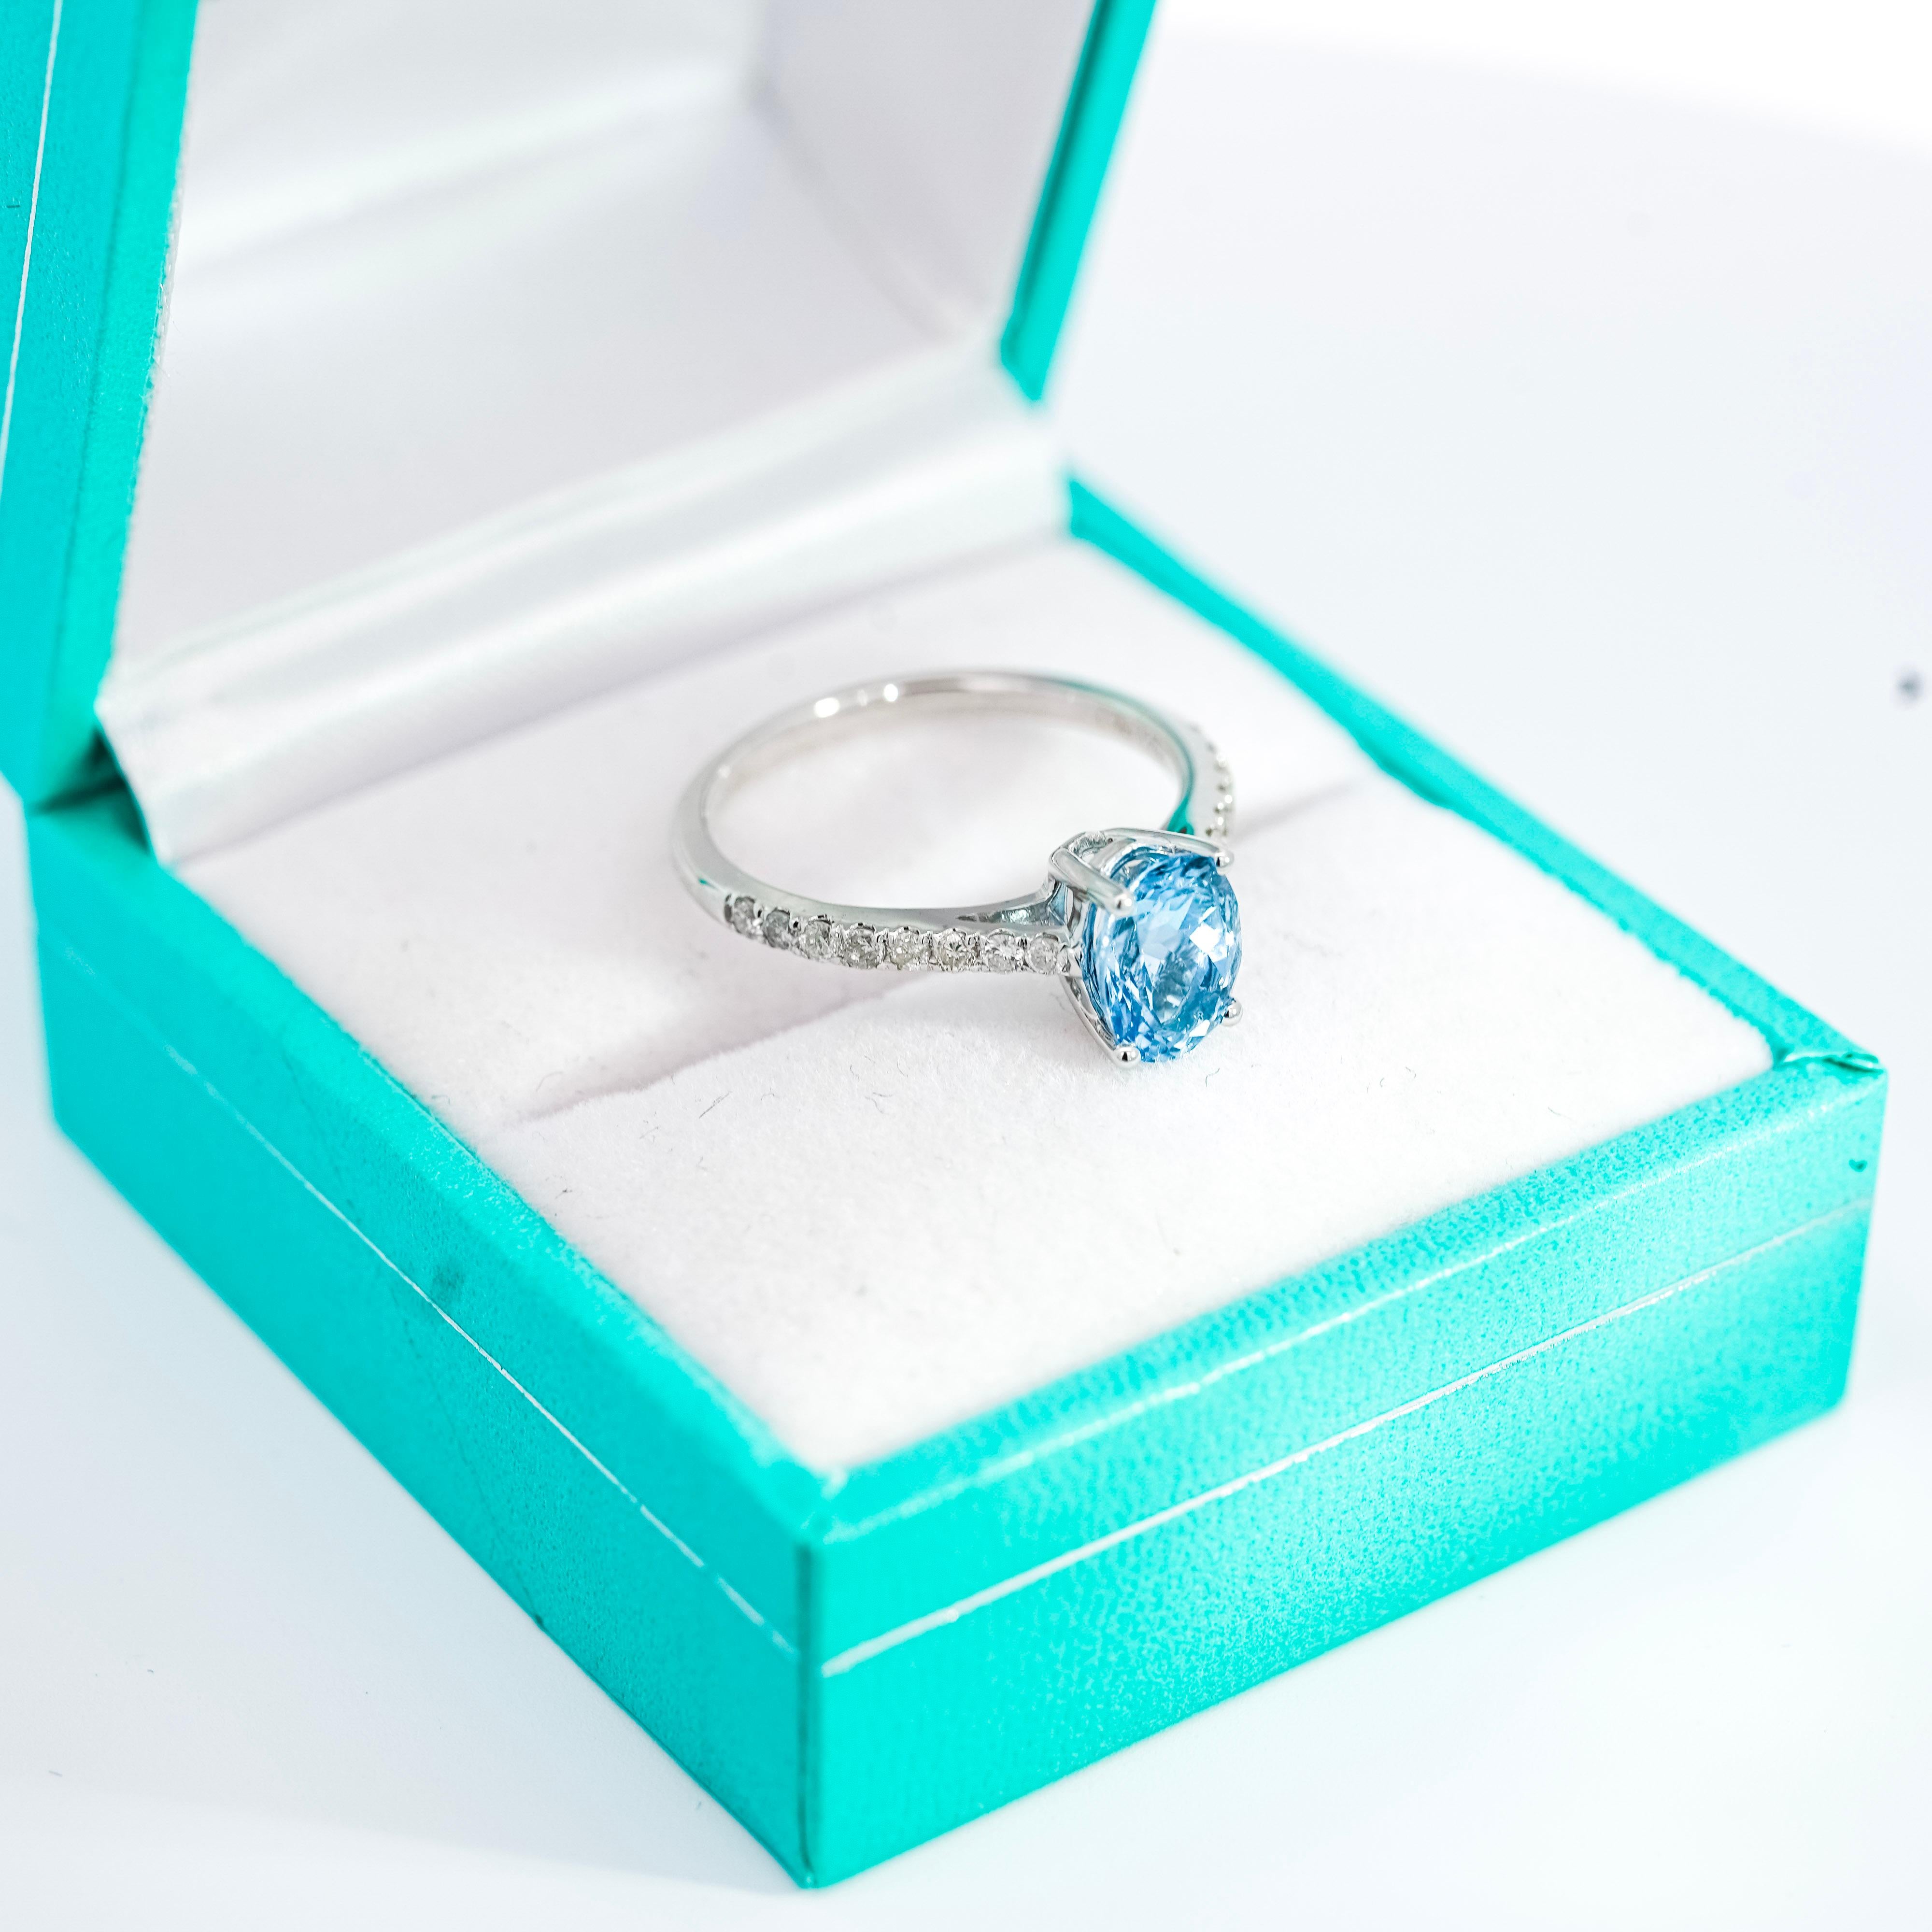 Natural Aquamarine and Diamond Solitaire Ring, Set in 14K Solid White Gold.

This solitaire ring features an oval-cut natural Aquamarine in a prong setting, radiating a vivid blue hue. Paired with round-cut diamond side stones totaling 0.25 carats.